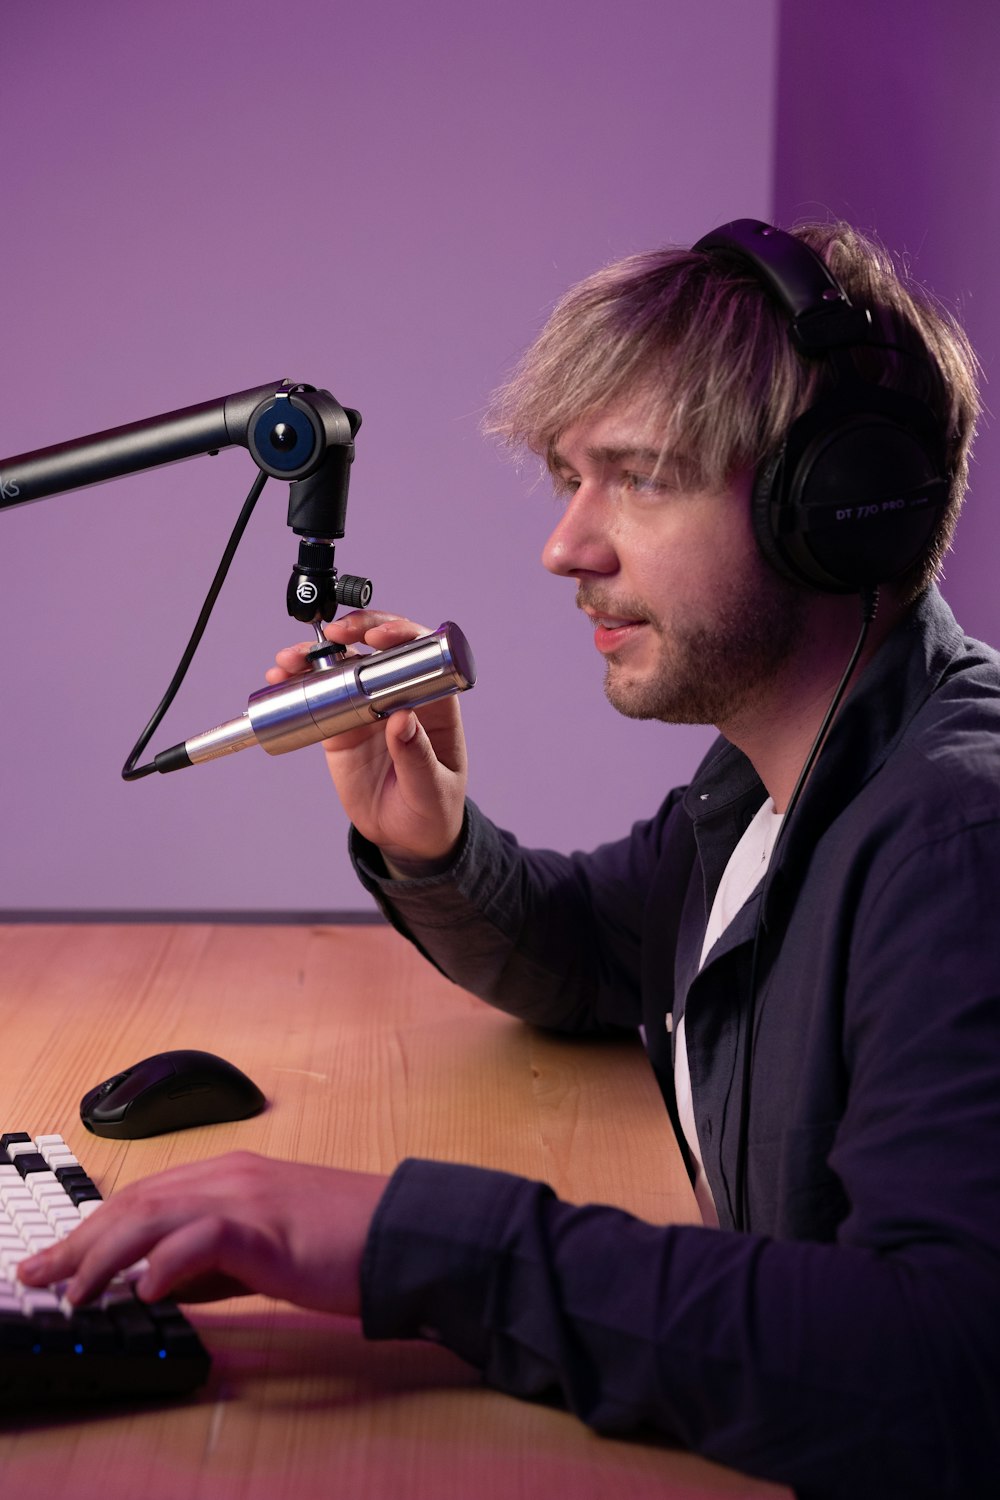 a person wearing headphones and using a microphone